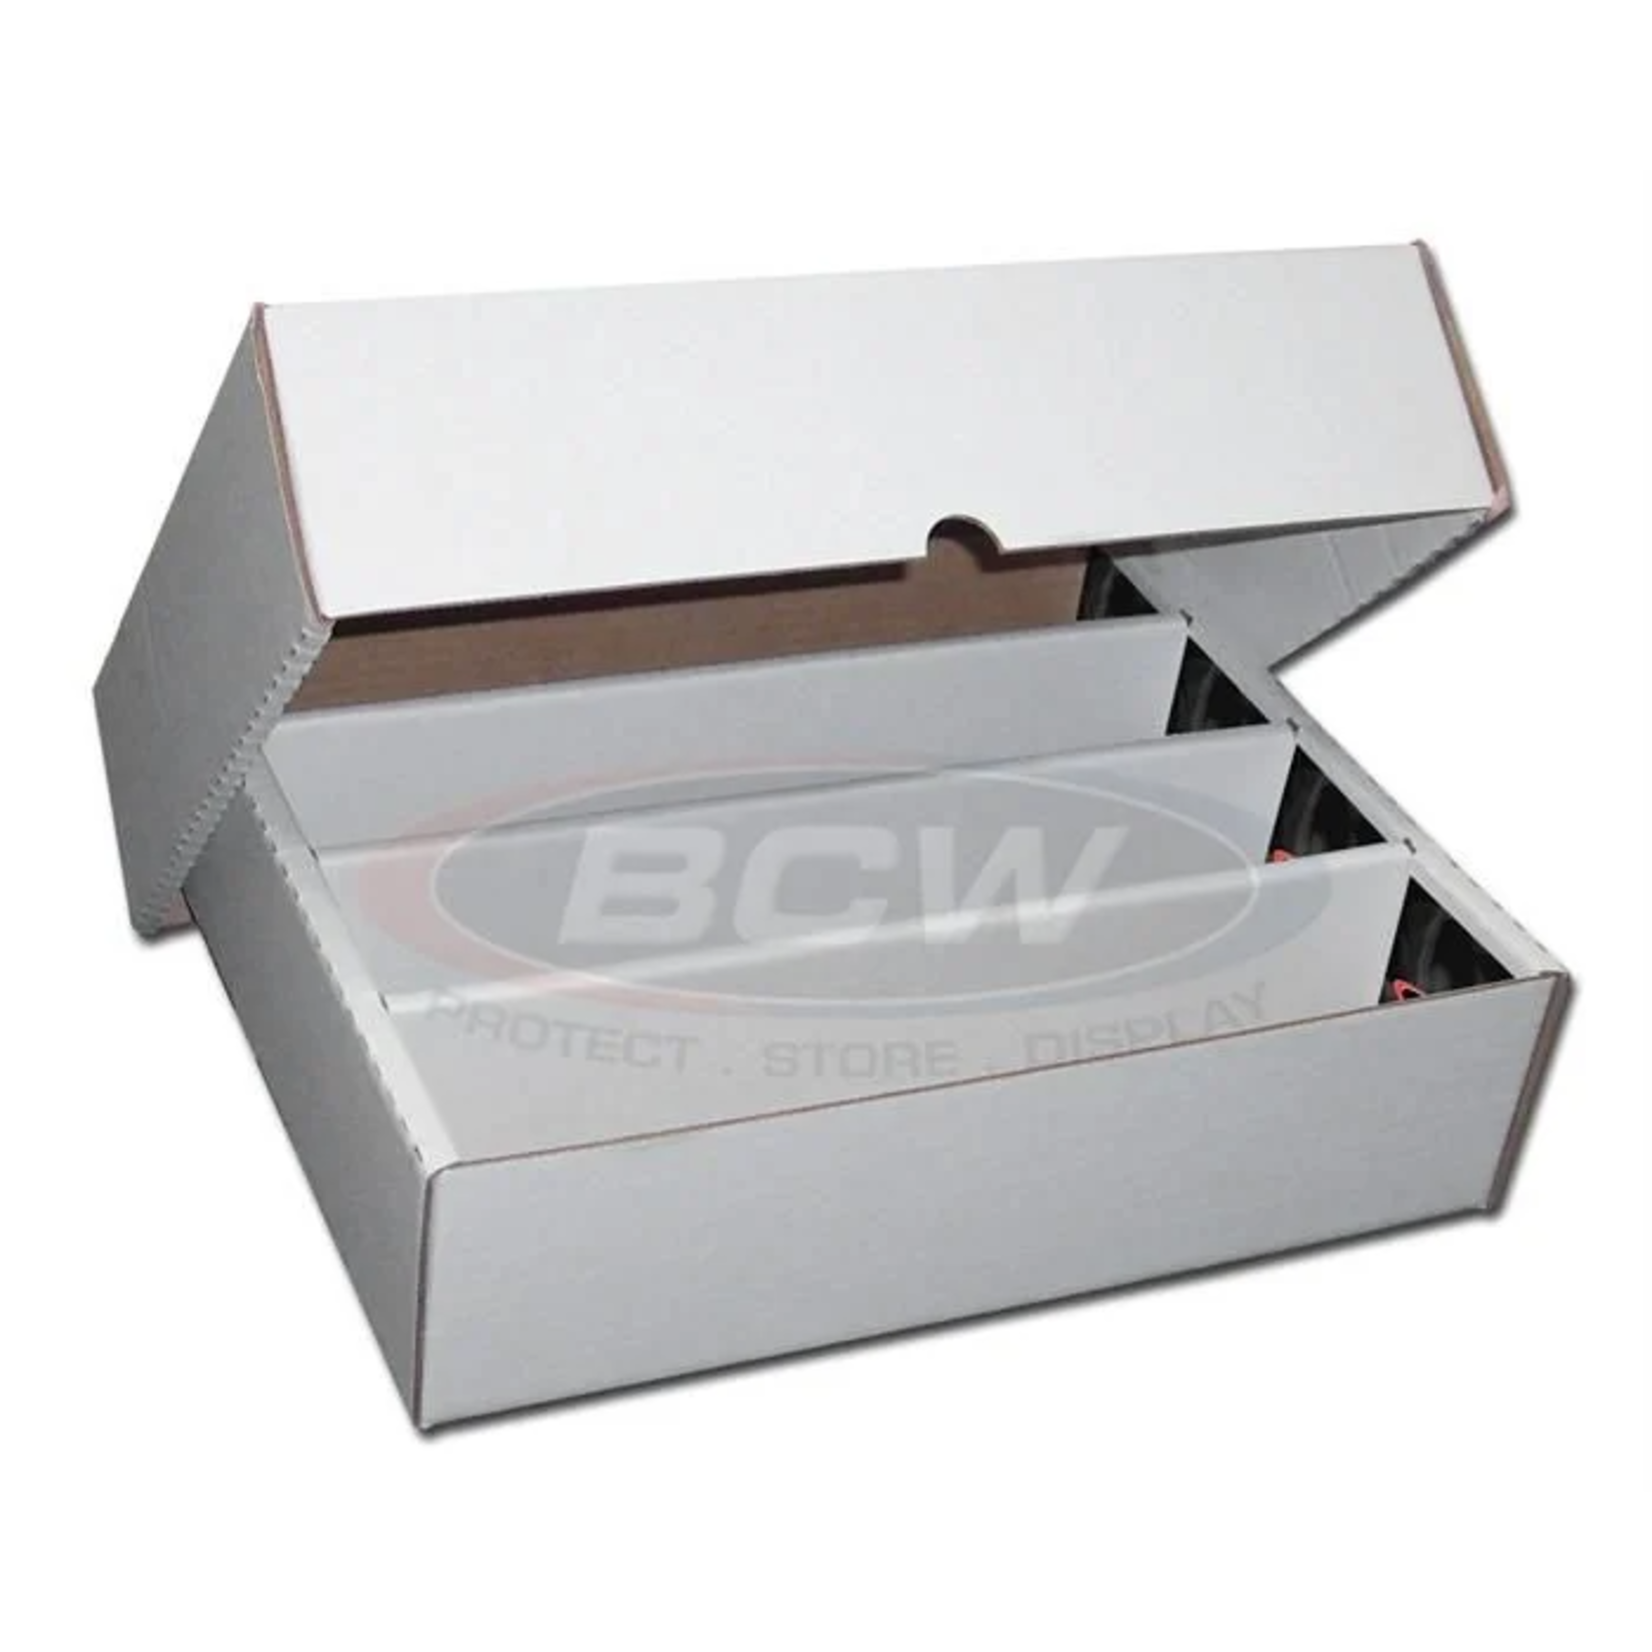 BCW Cardboard Storage Box (Fits 3200 Standard Trading or 4800 Collectible Cards)